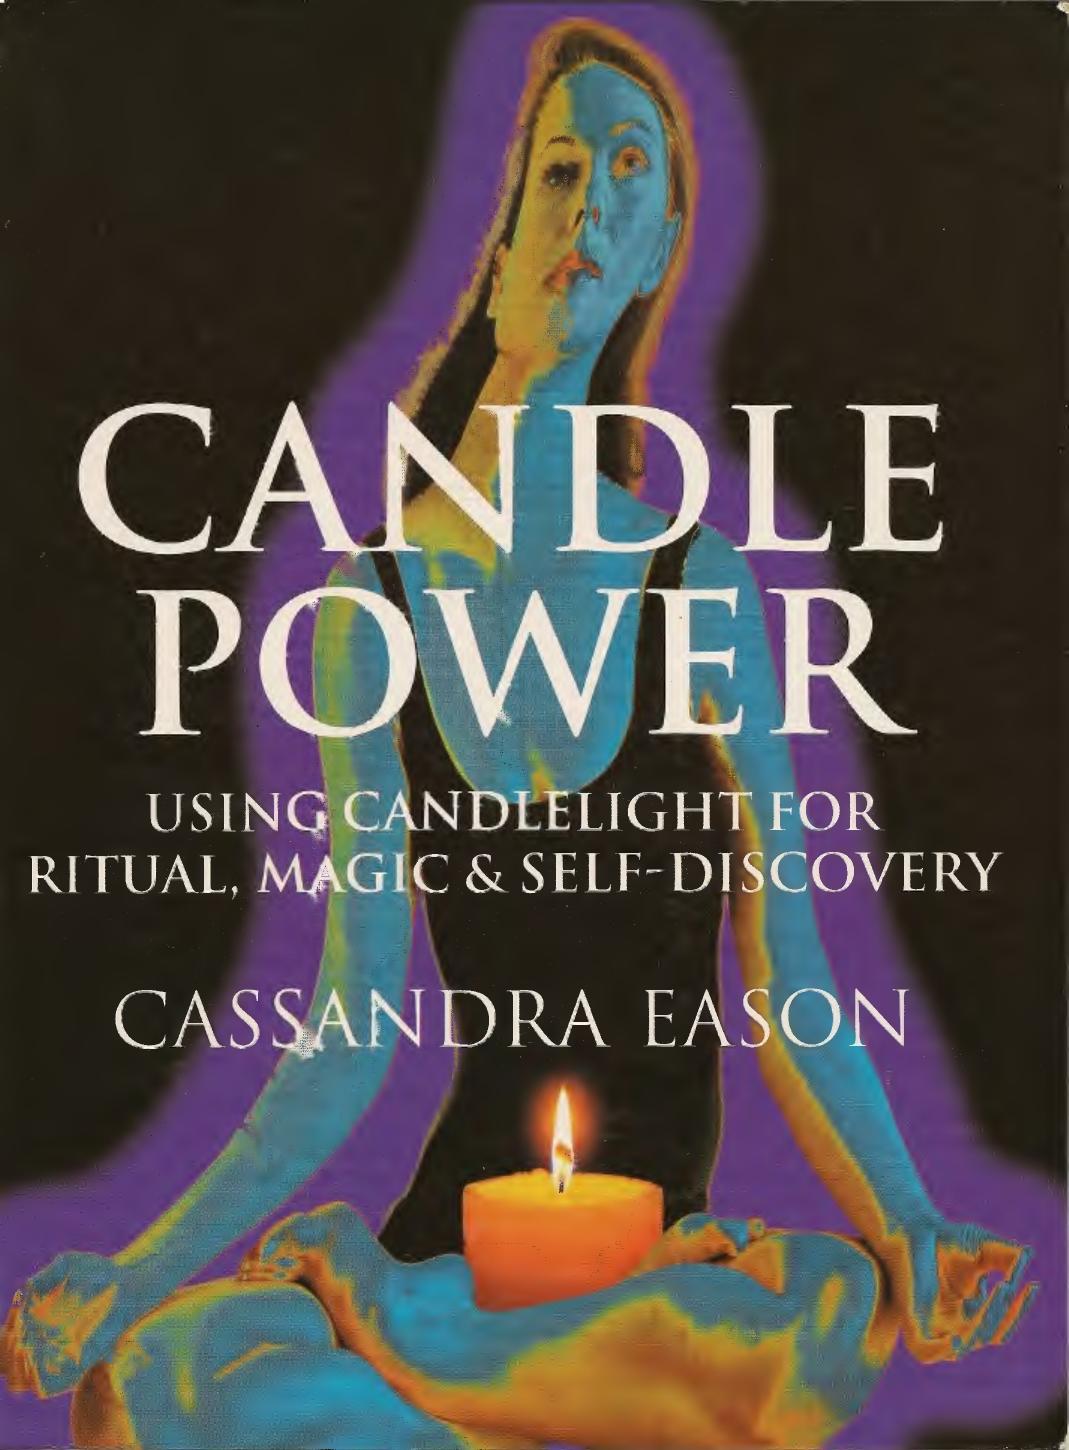 Candle Power: Using Candlelight for Ritual, Magic and Self-Discovery